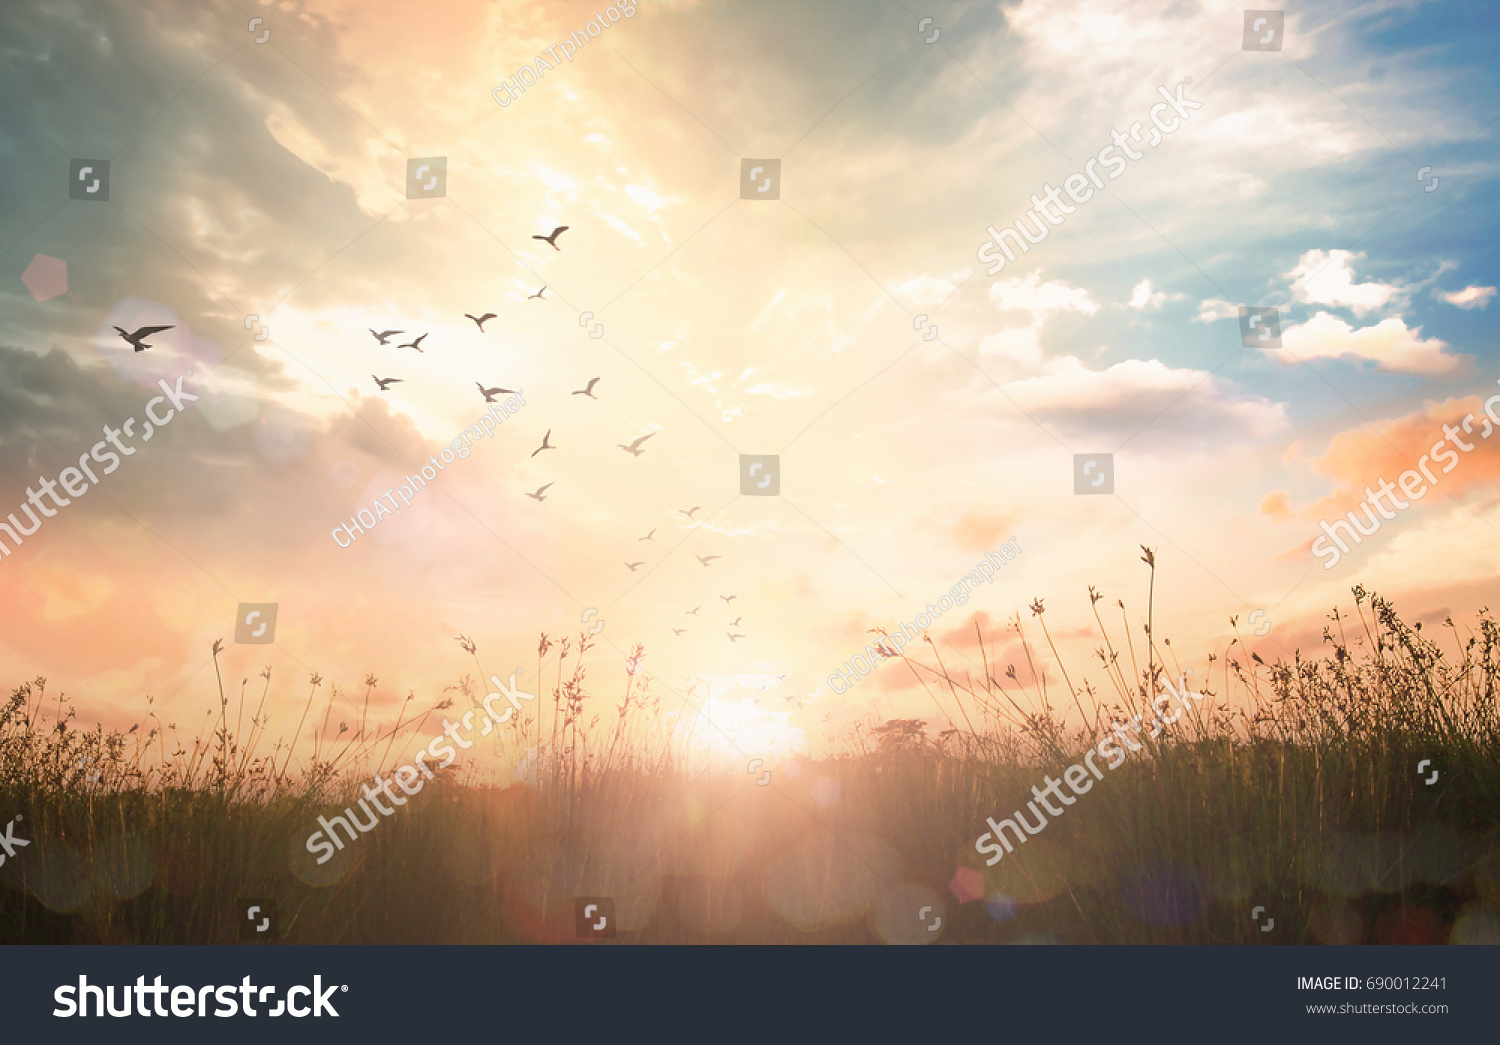 Easter Religious concept: Silhouette birds flying on meadow autumn sunrise landscape background #690012241